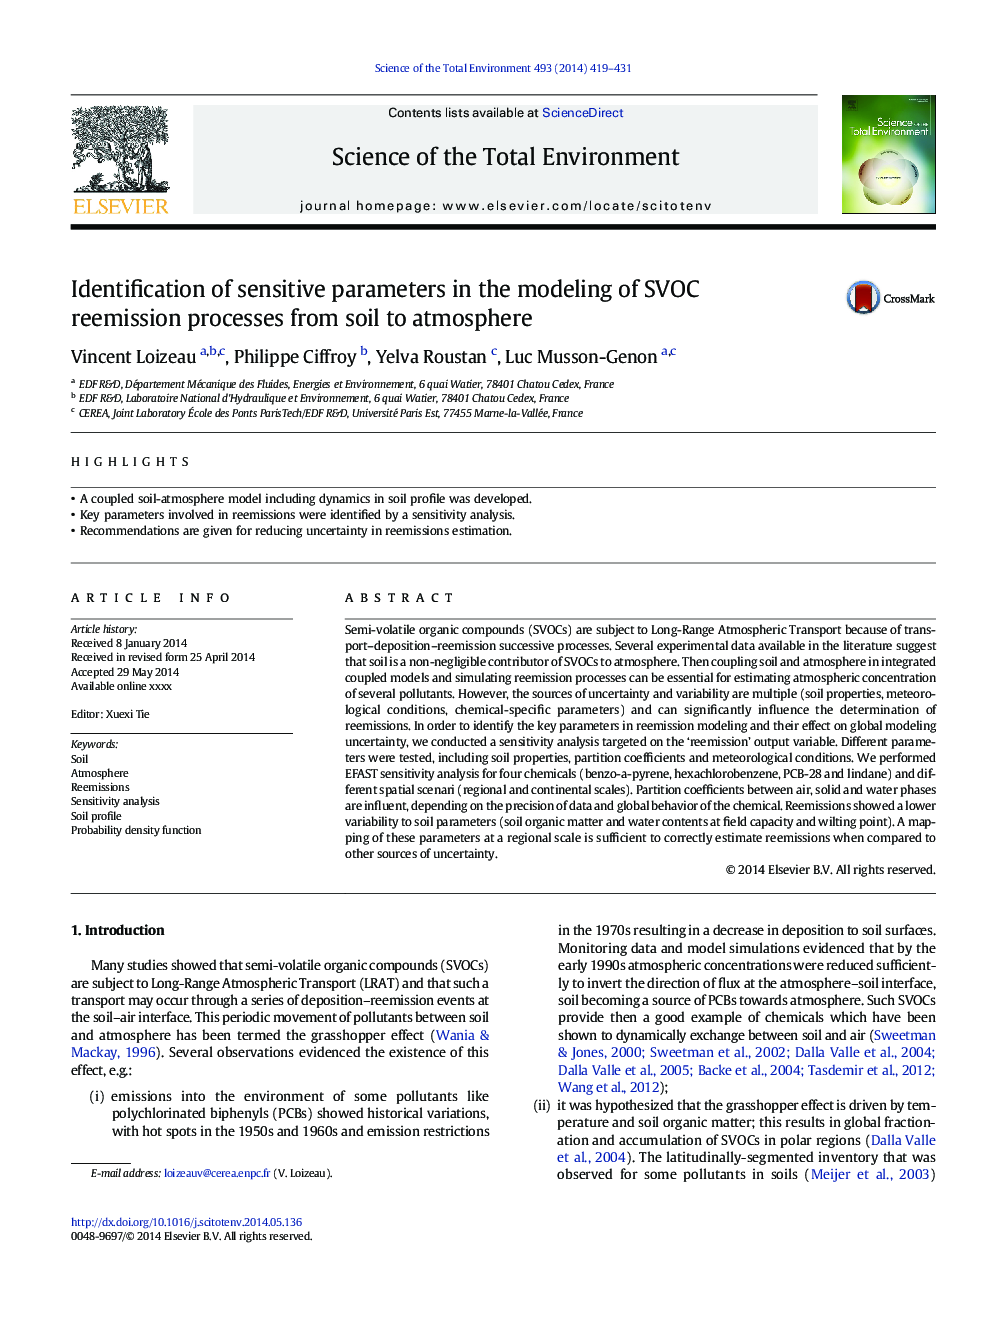 Identification of sensitive parameters in the modeling of SVOC reemission processes from soil to atmosphere